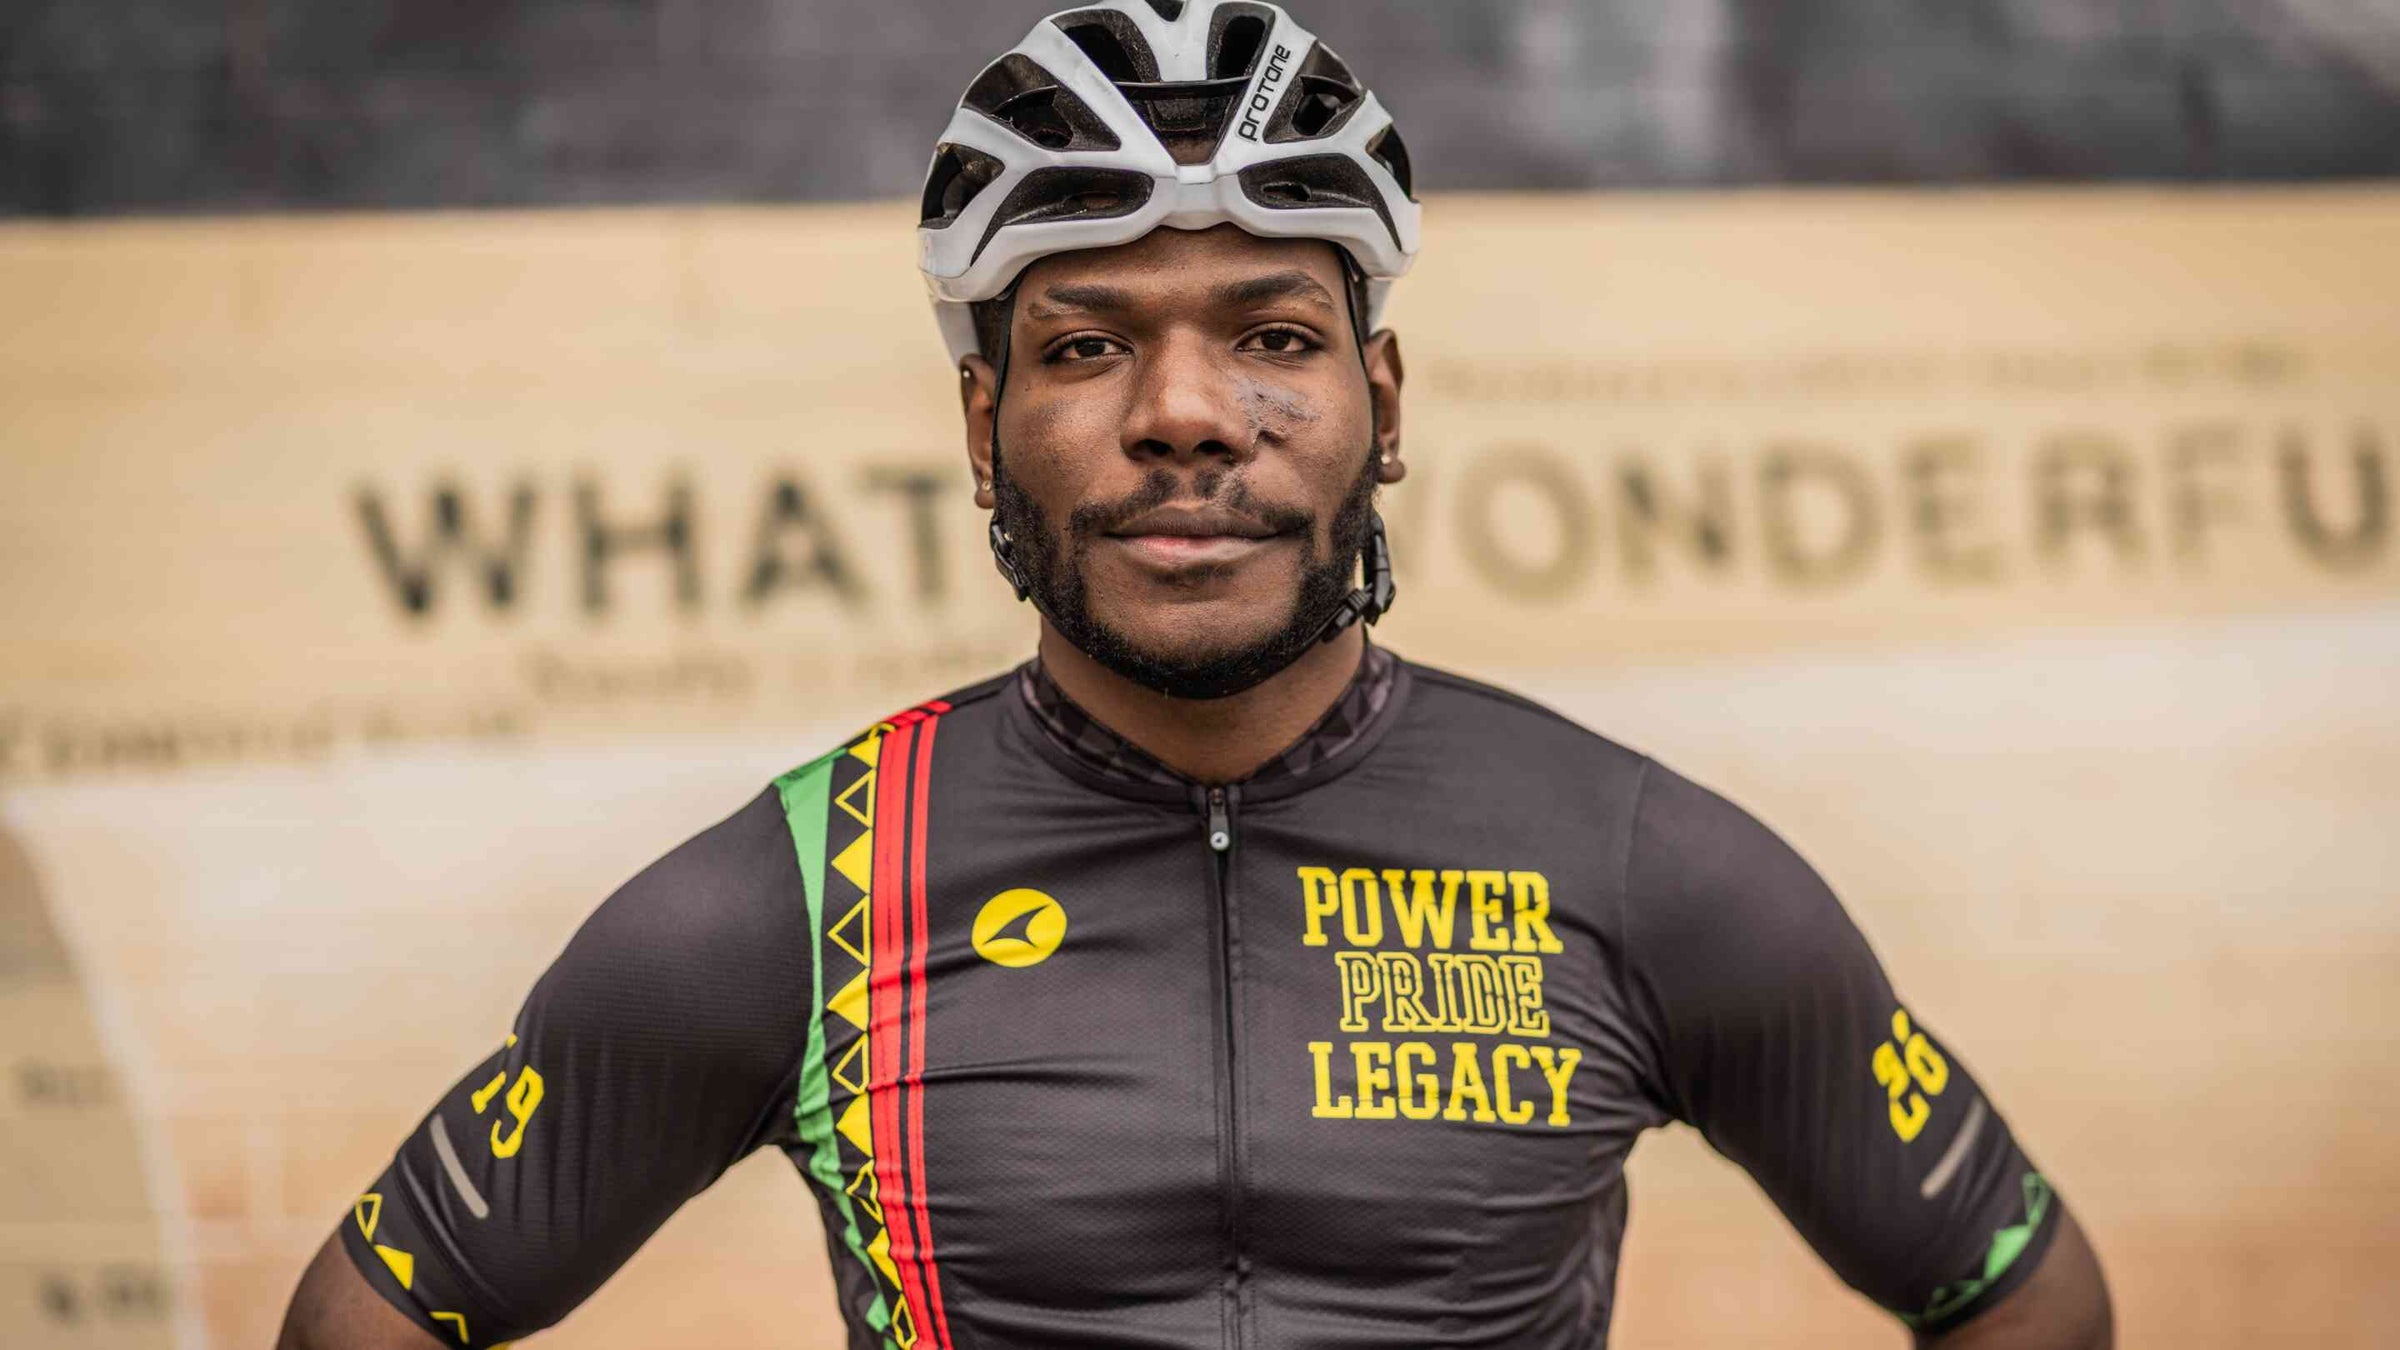 Pactimo Cycling Clothing - Supporting Black Cyclists